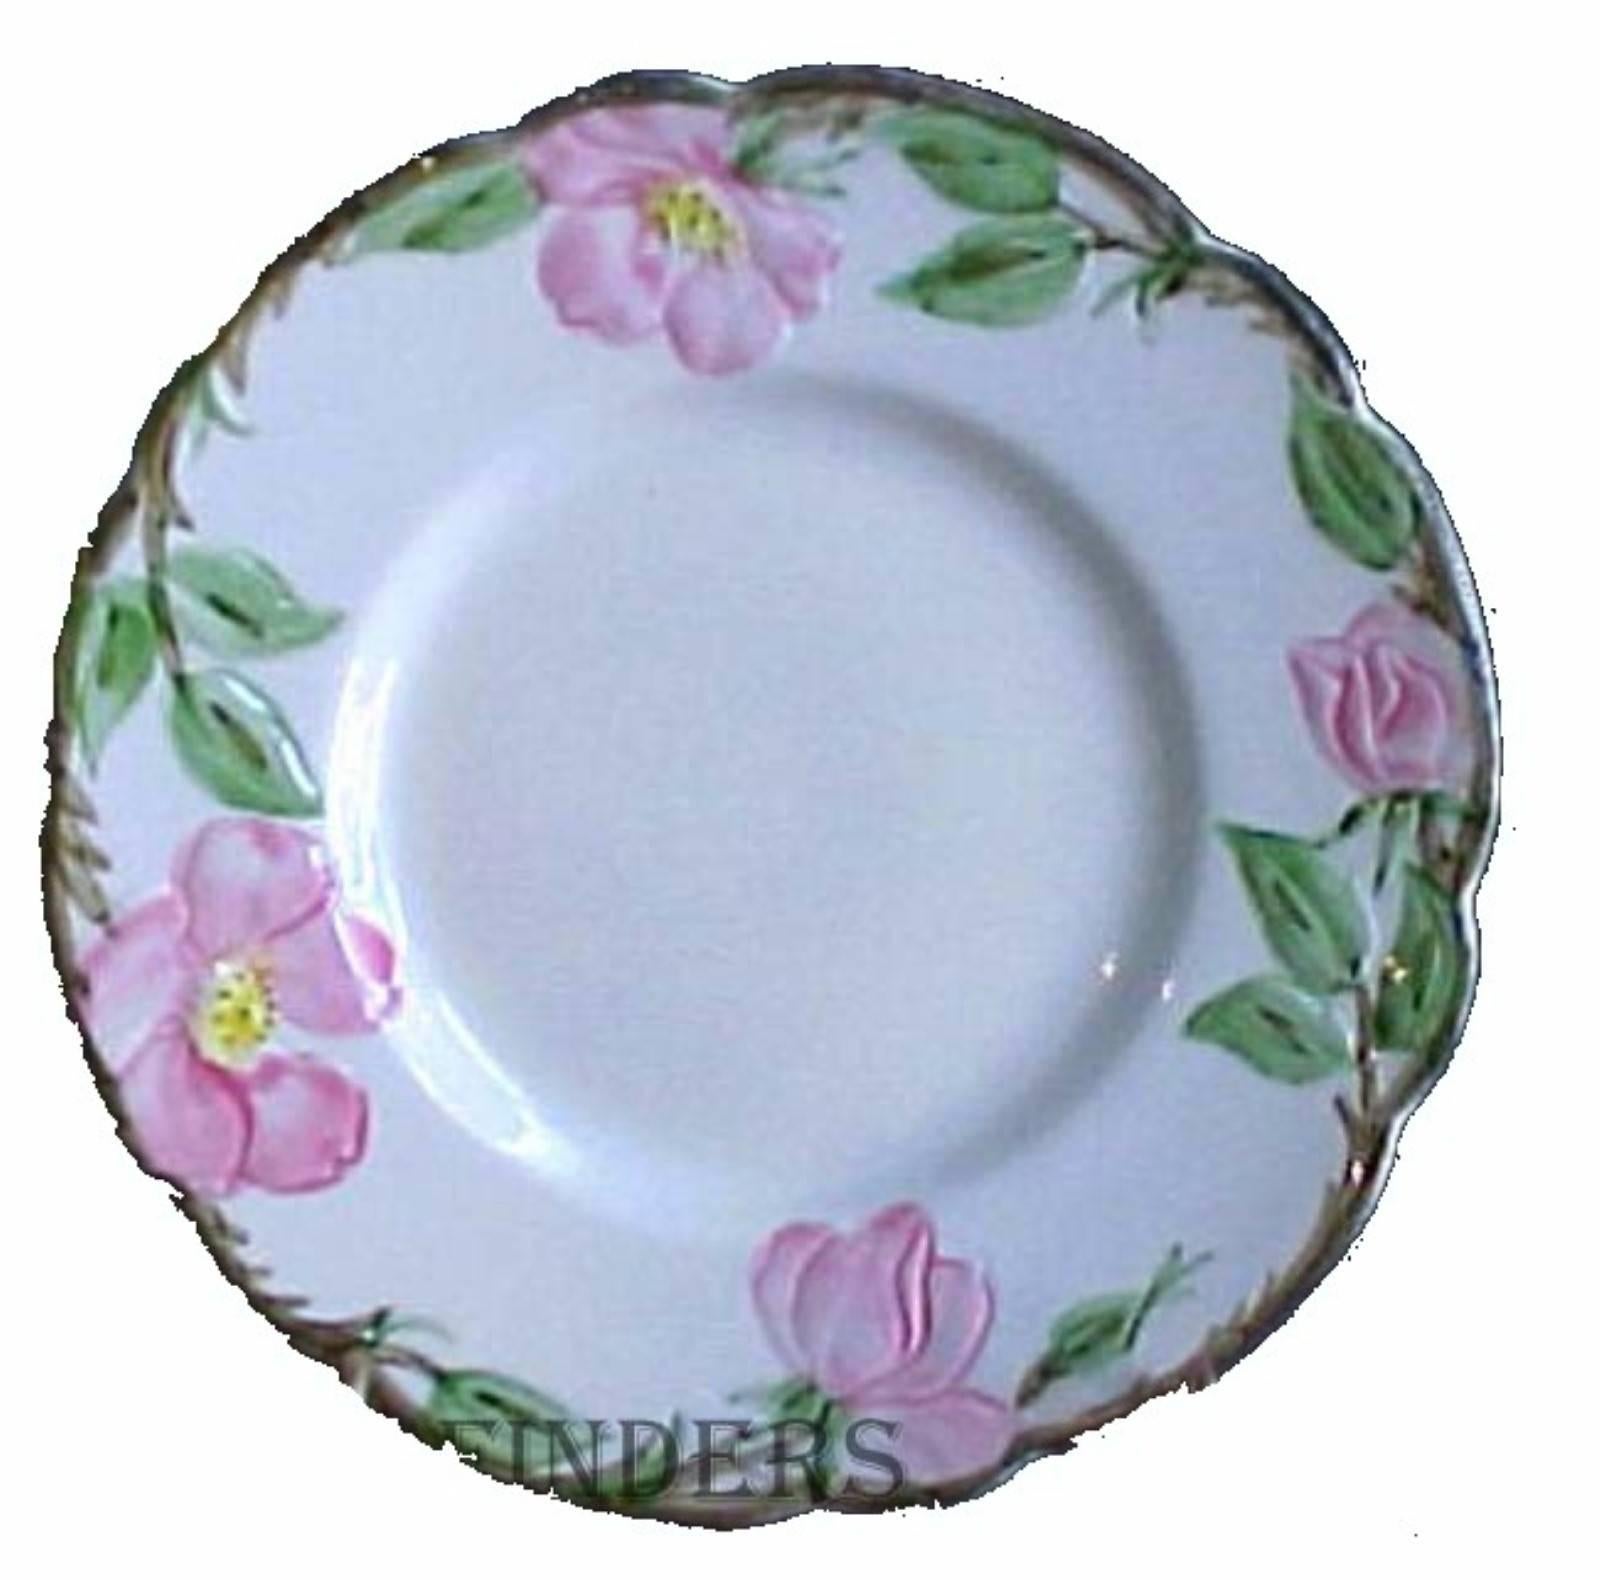 CHINA FINDERS 

China, Crystal, Flatware and Collectible Matching Service is offering ONE (1) 

FRANCISCAN china DESERT ROSE pattern Set of Twelve (12) Salad Plates

in great condition free from chips, cracks, break or stain and show minimal